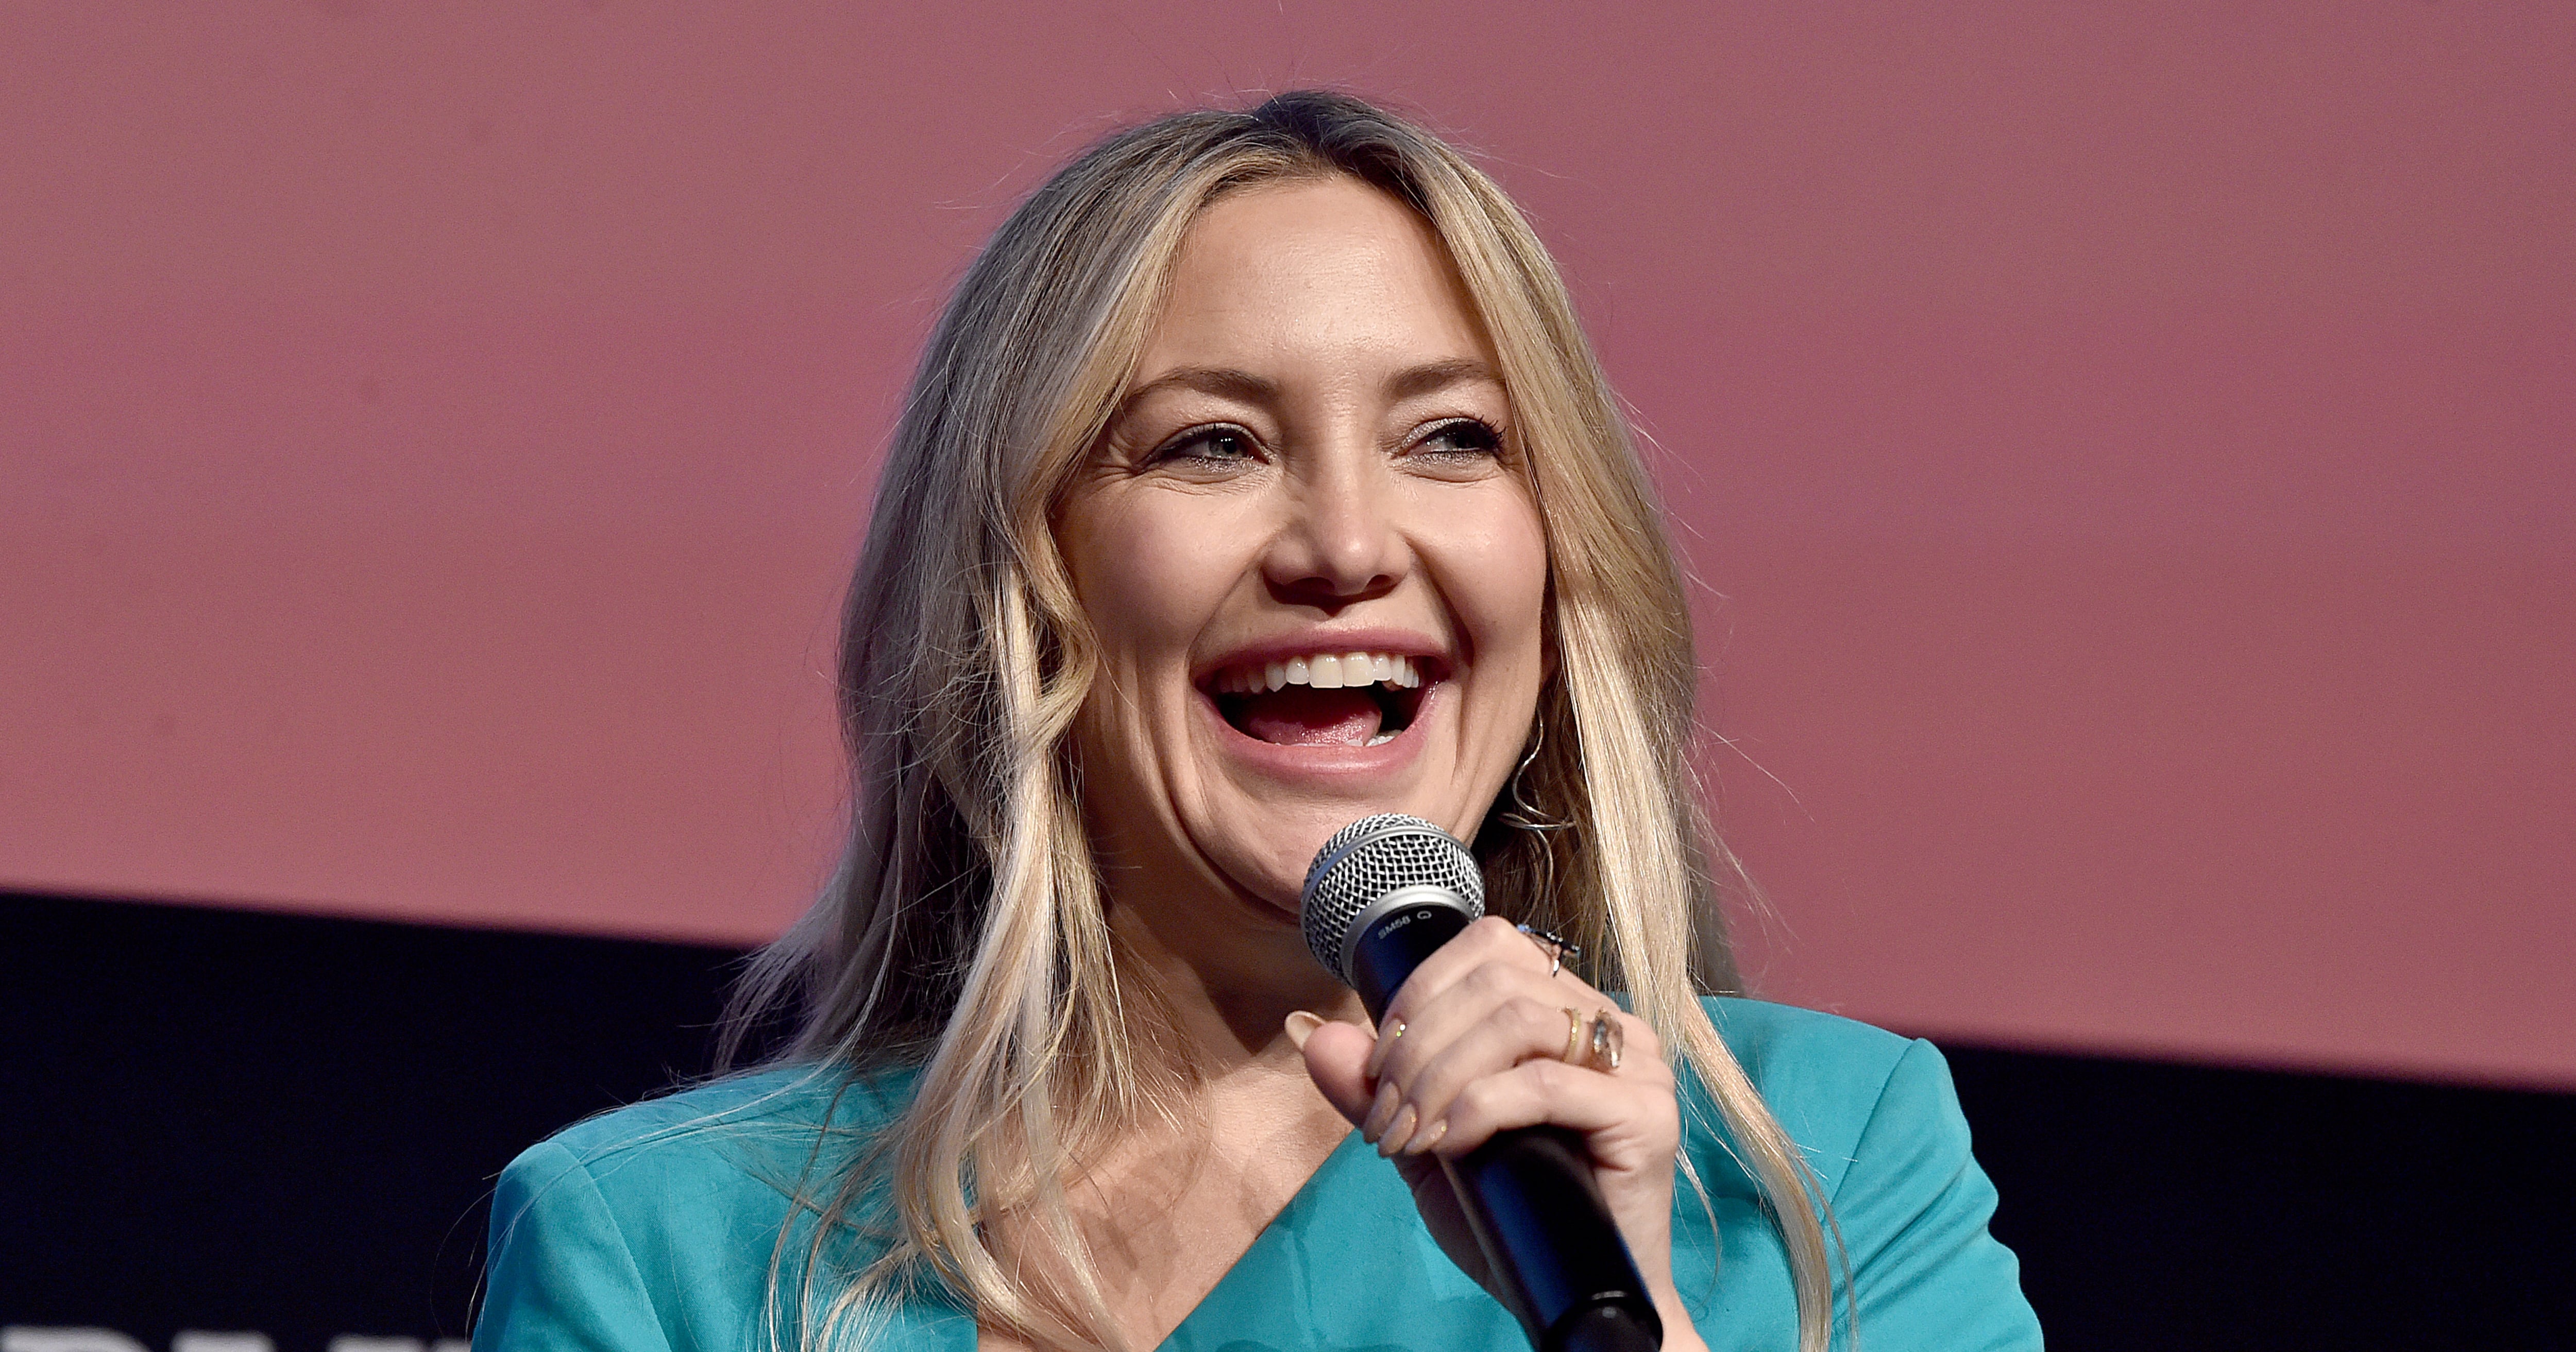 Kate Hudson Teases Her 1st Single 'Talk About Love